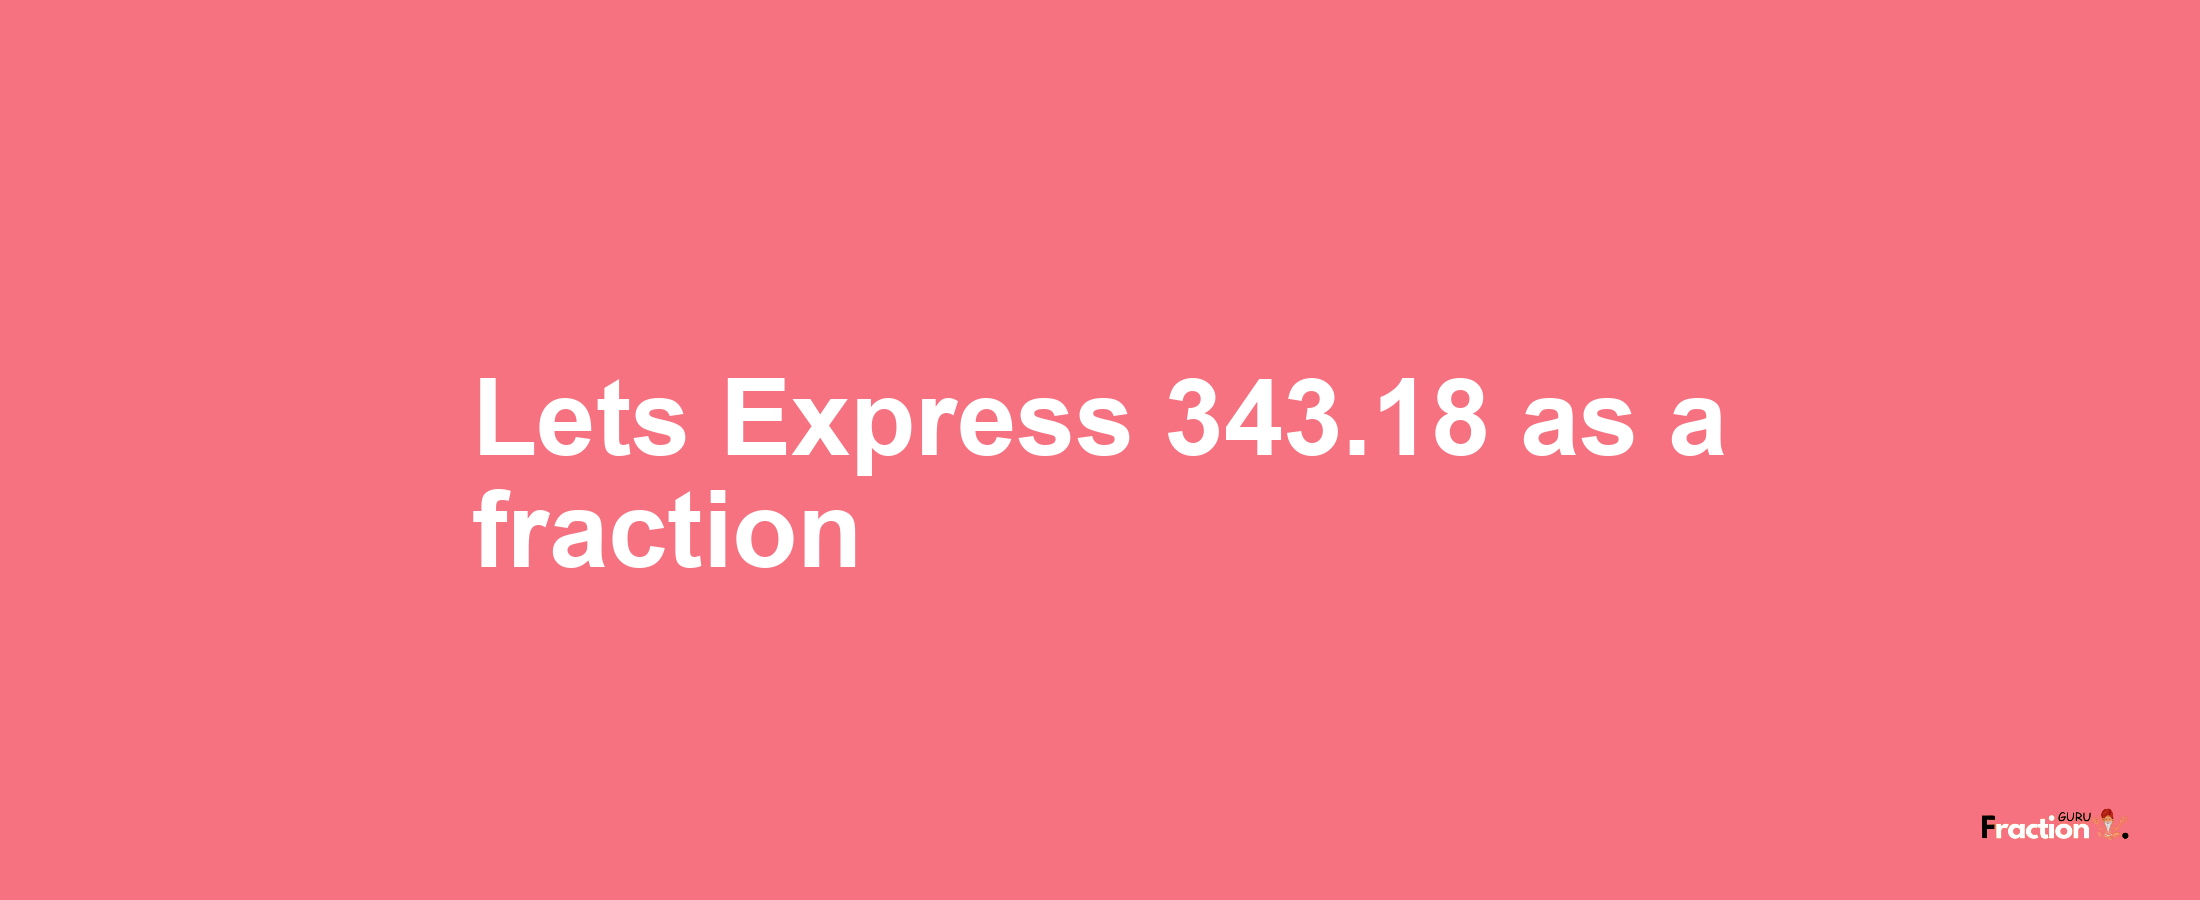 Lets Express 343.18 as afraction